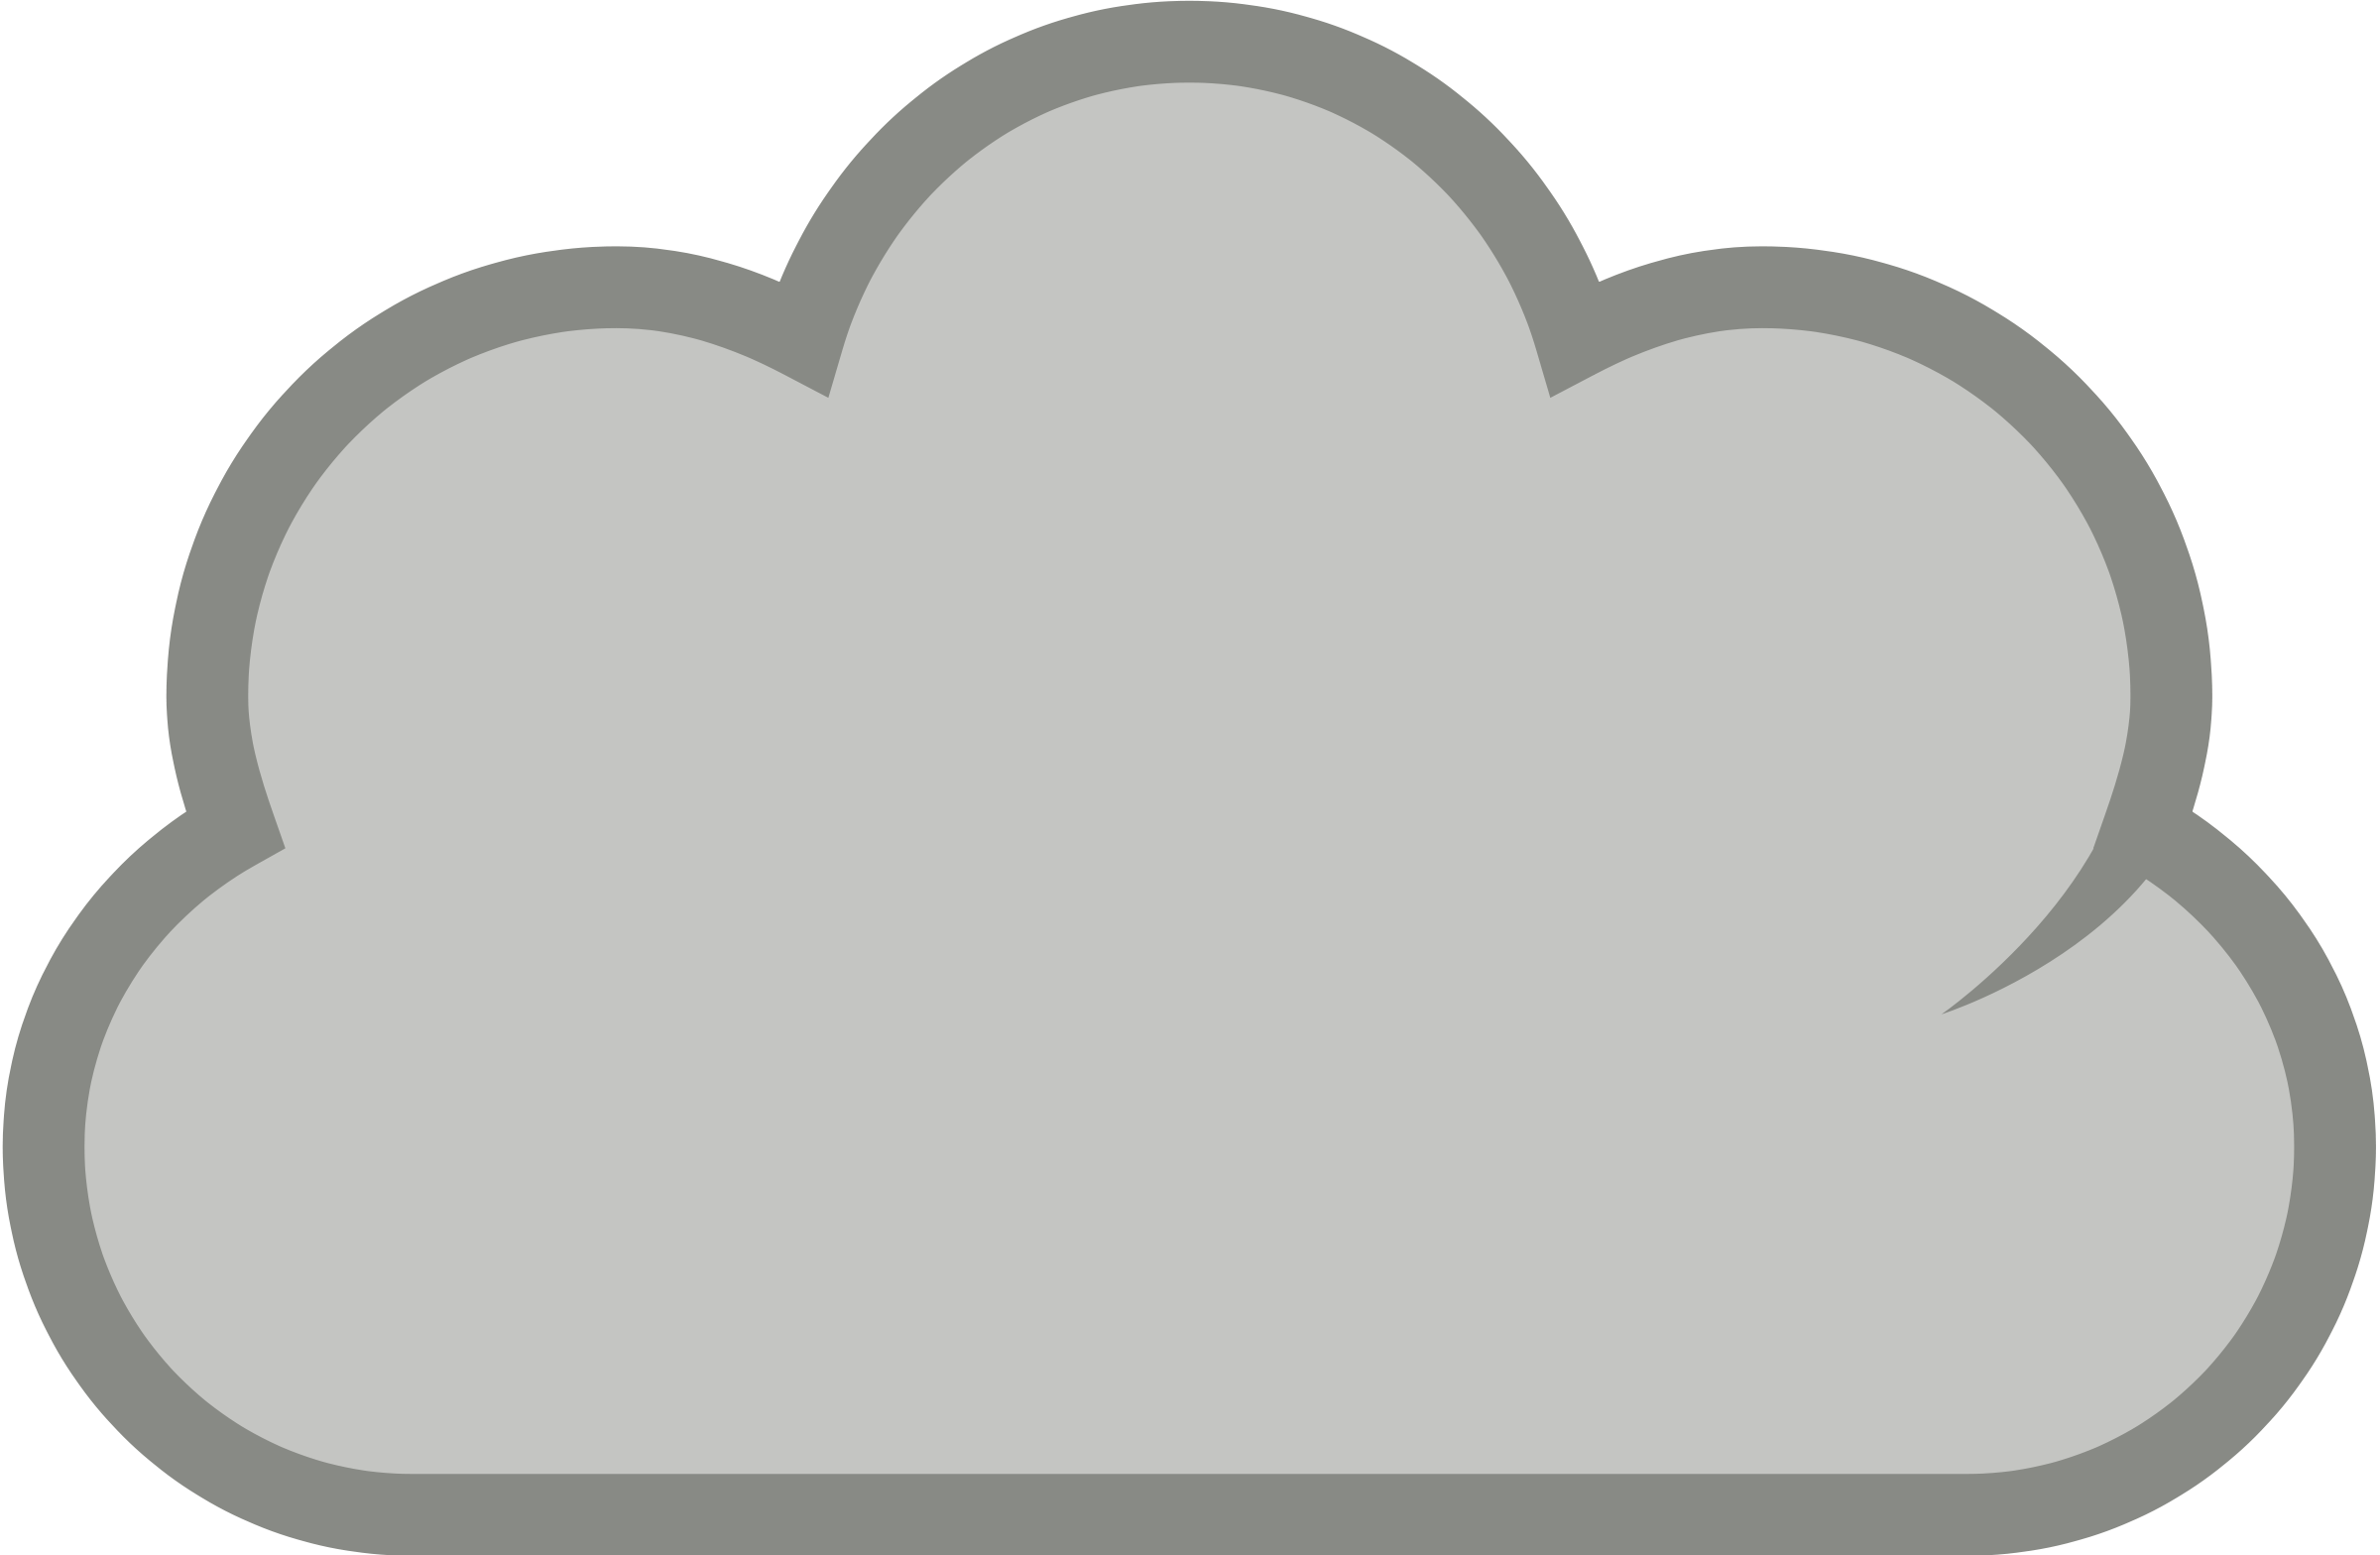 Partly cloudy clipart free download clip art